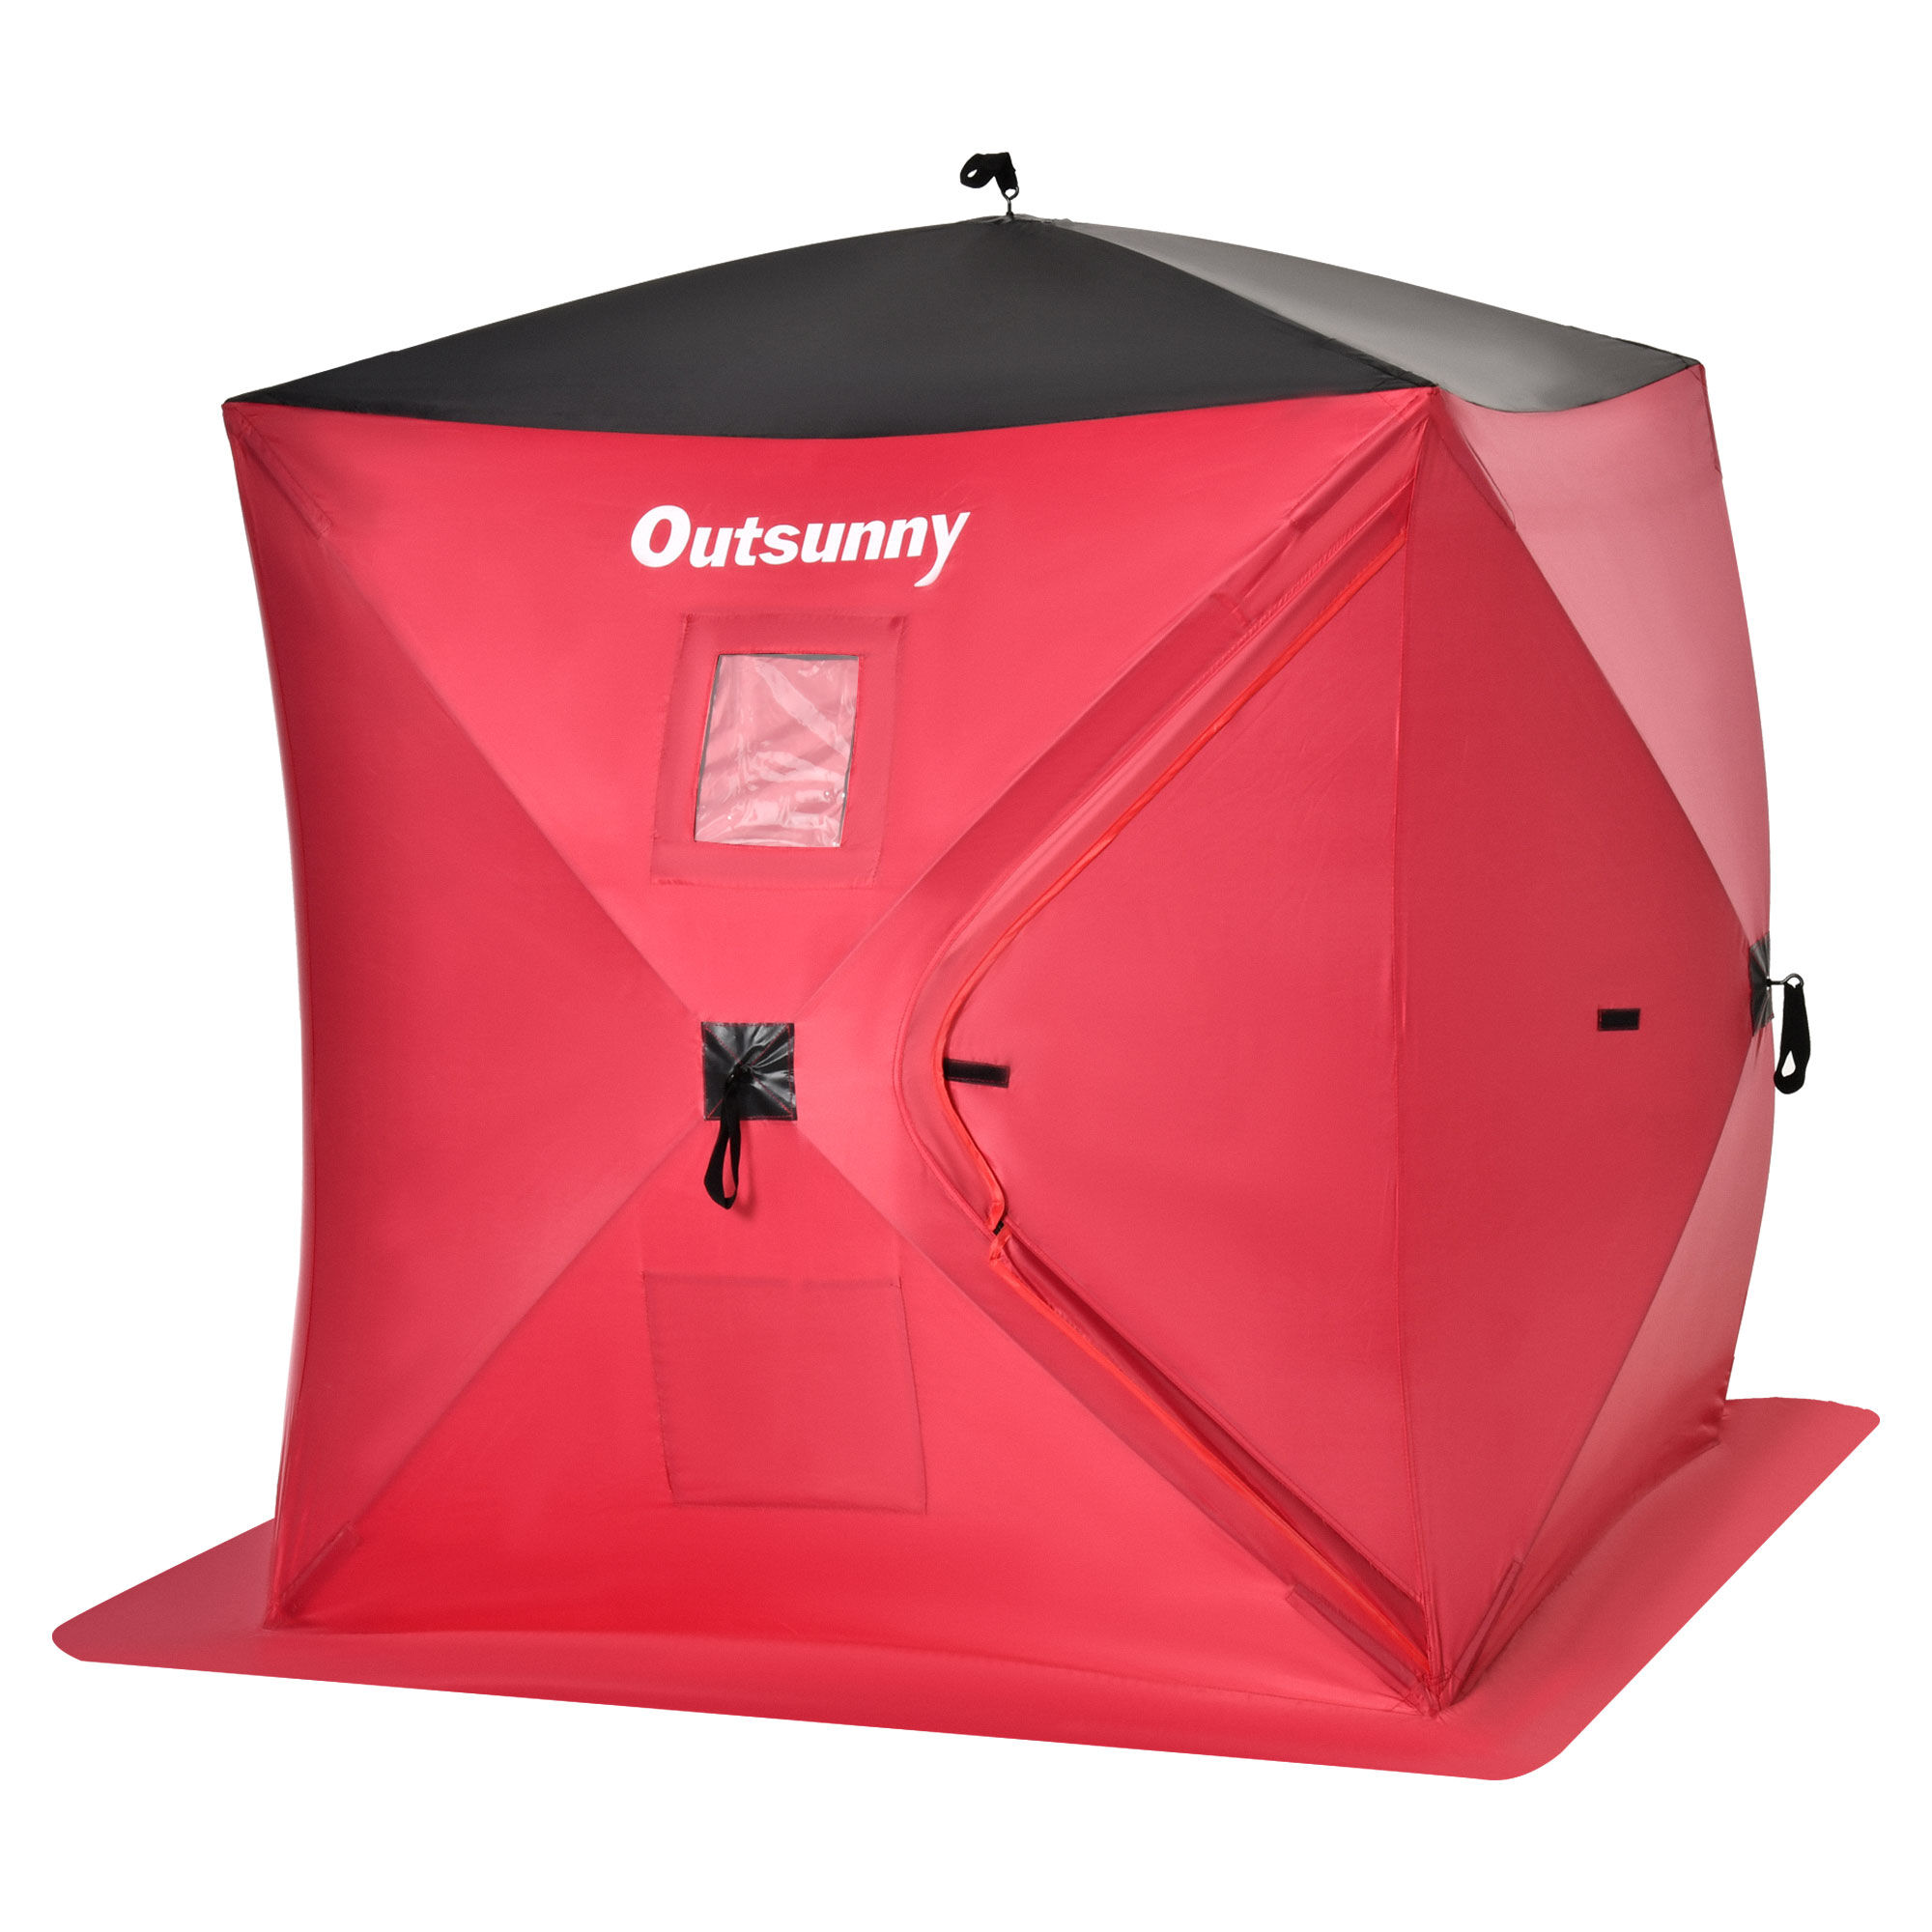 Outsunny 2 Person Ice Fishing Tent Red Waterproof Oxford Fabric Portable Pop-up Shelter with Carry Bag for Outdoor Fishing Fun   Aosom.com